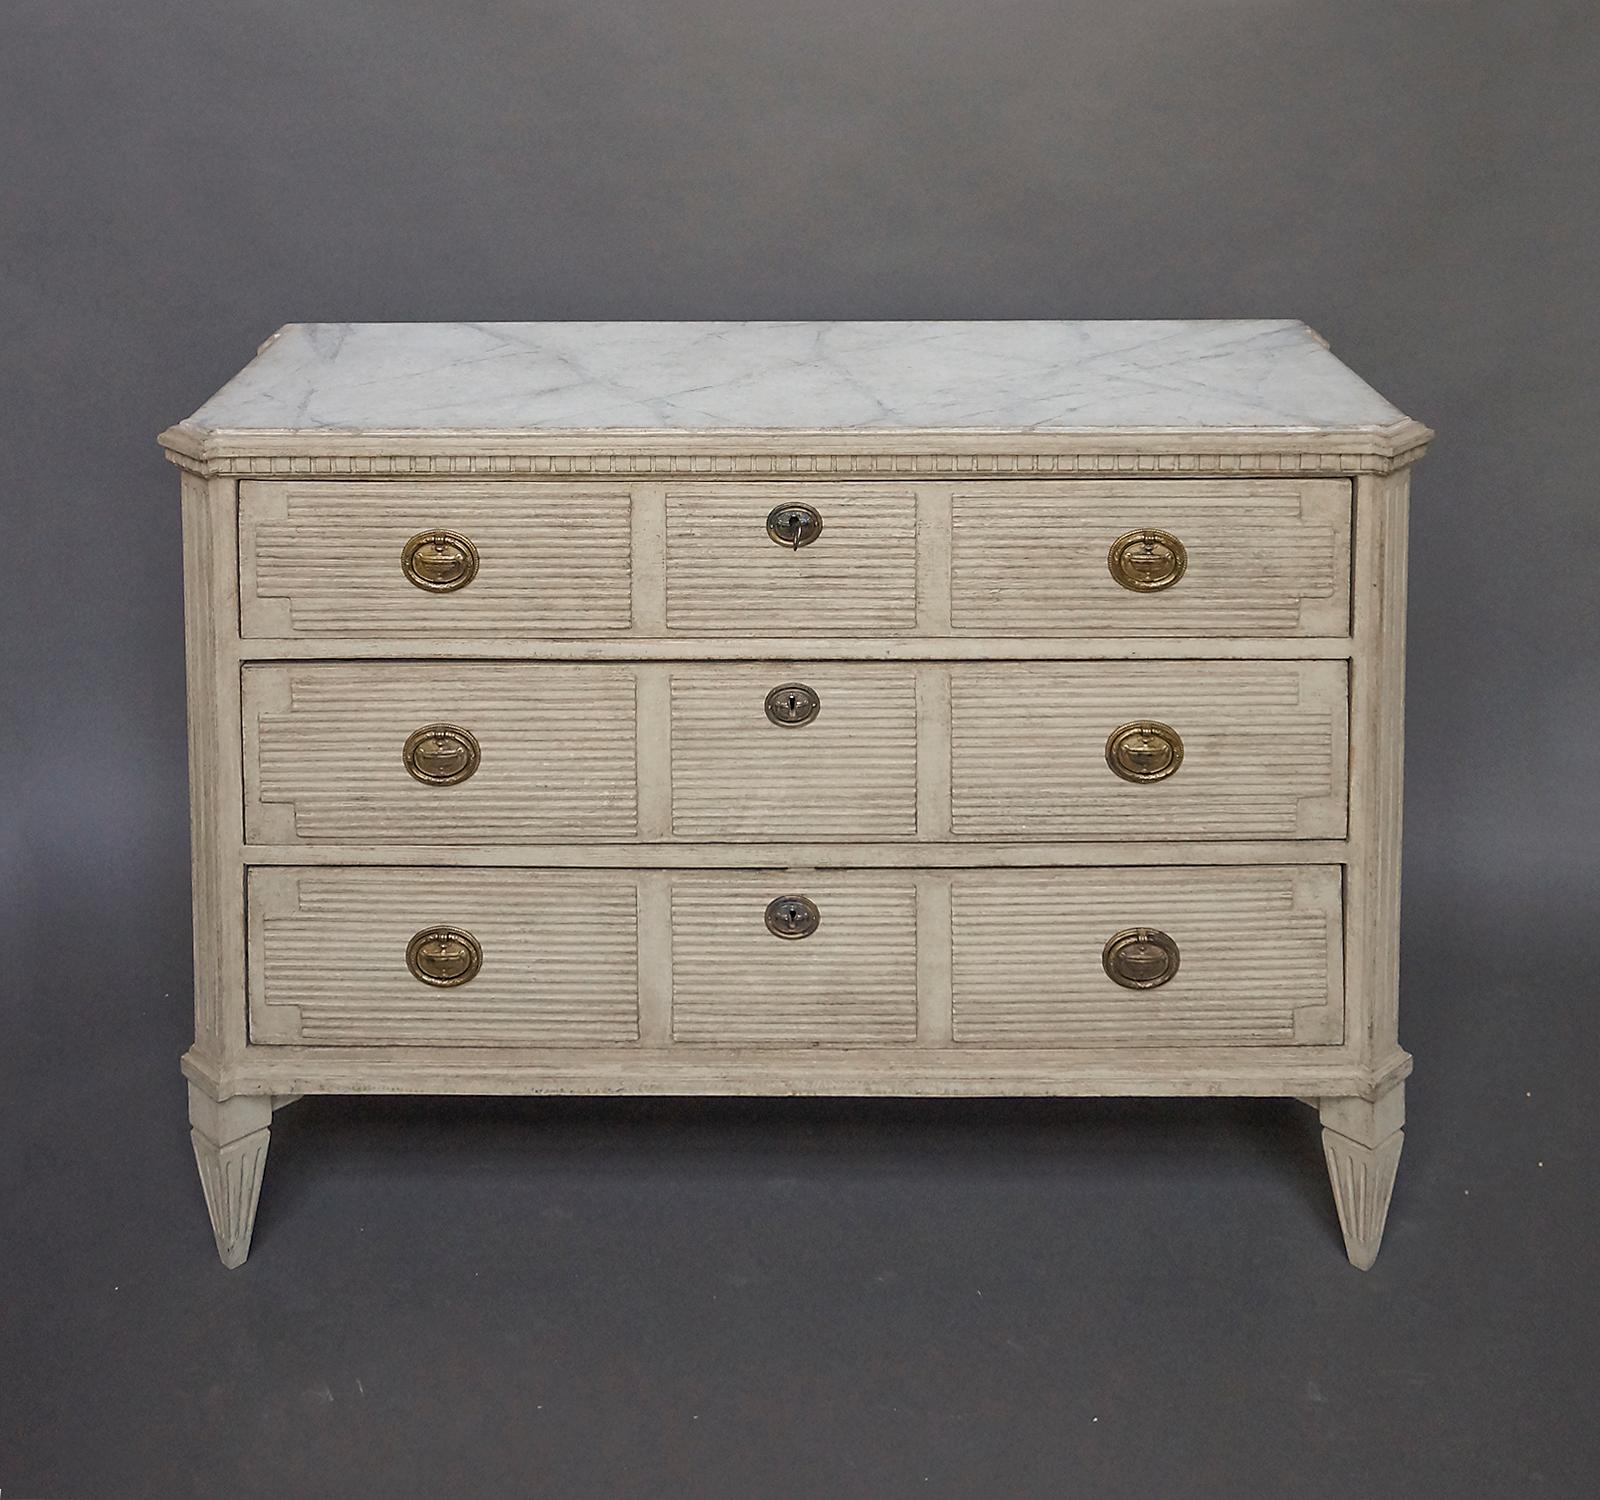 Hand-Carved Swedish Chest of Drawers with Neoclassical Details